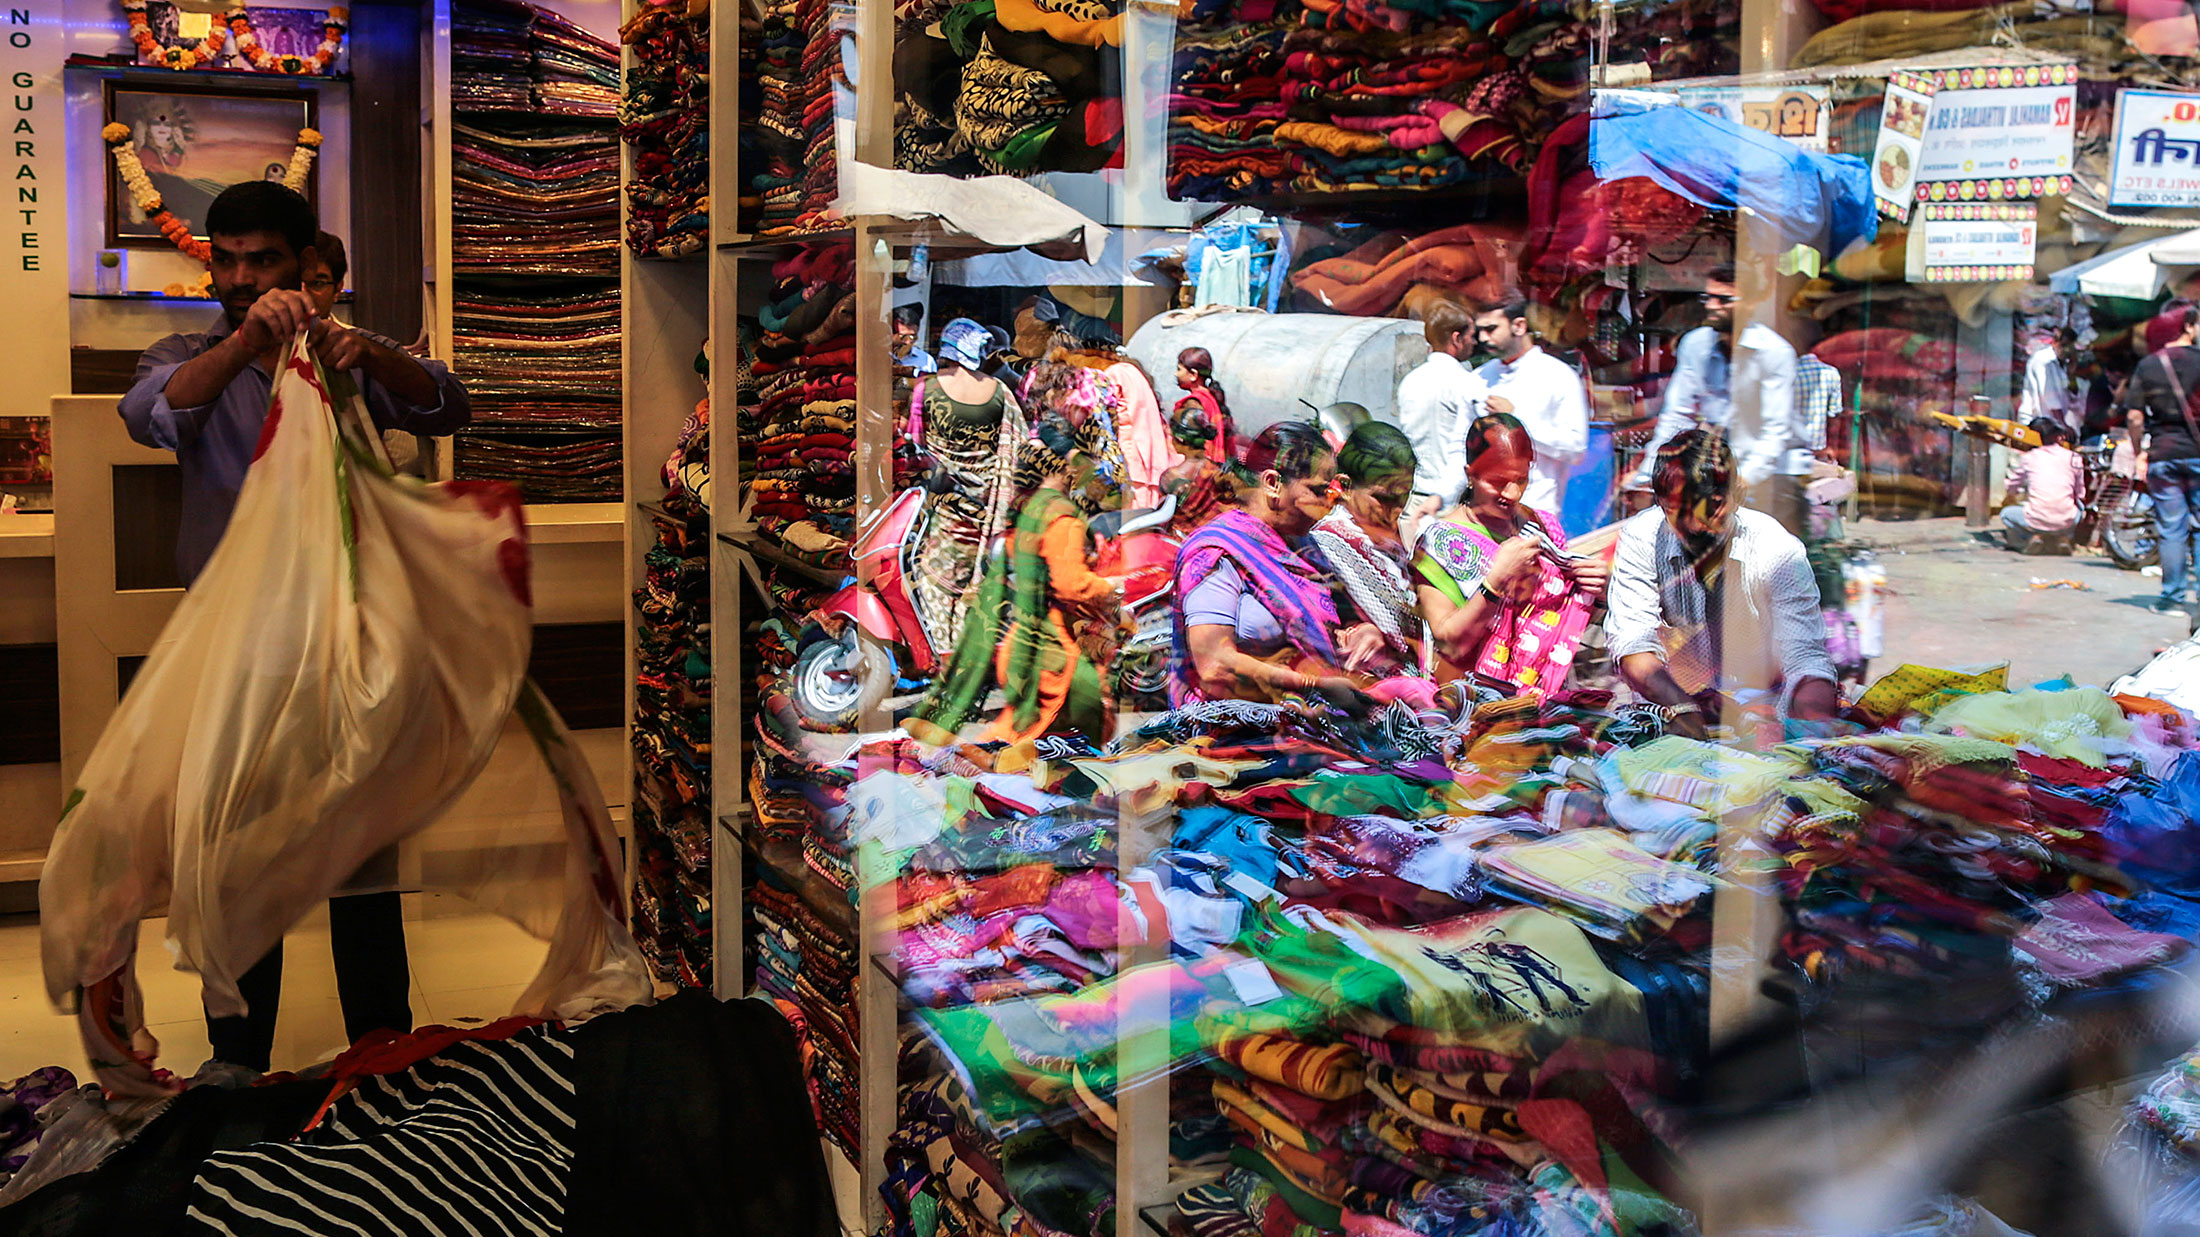 Customers browsing at a fabric stall are reflected in a store window at Mangaldas Market in Mumbai, India, on Feb. 26, 2015.
